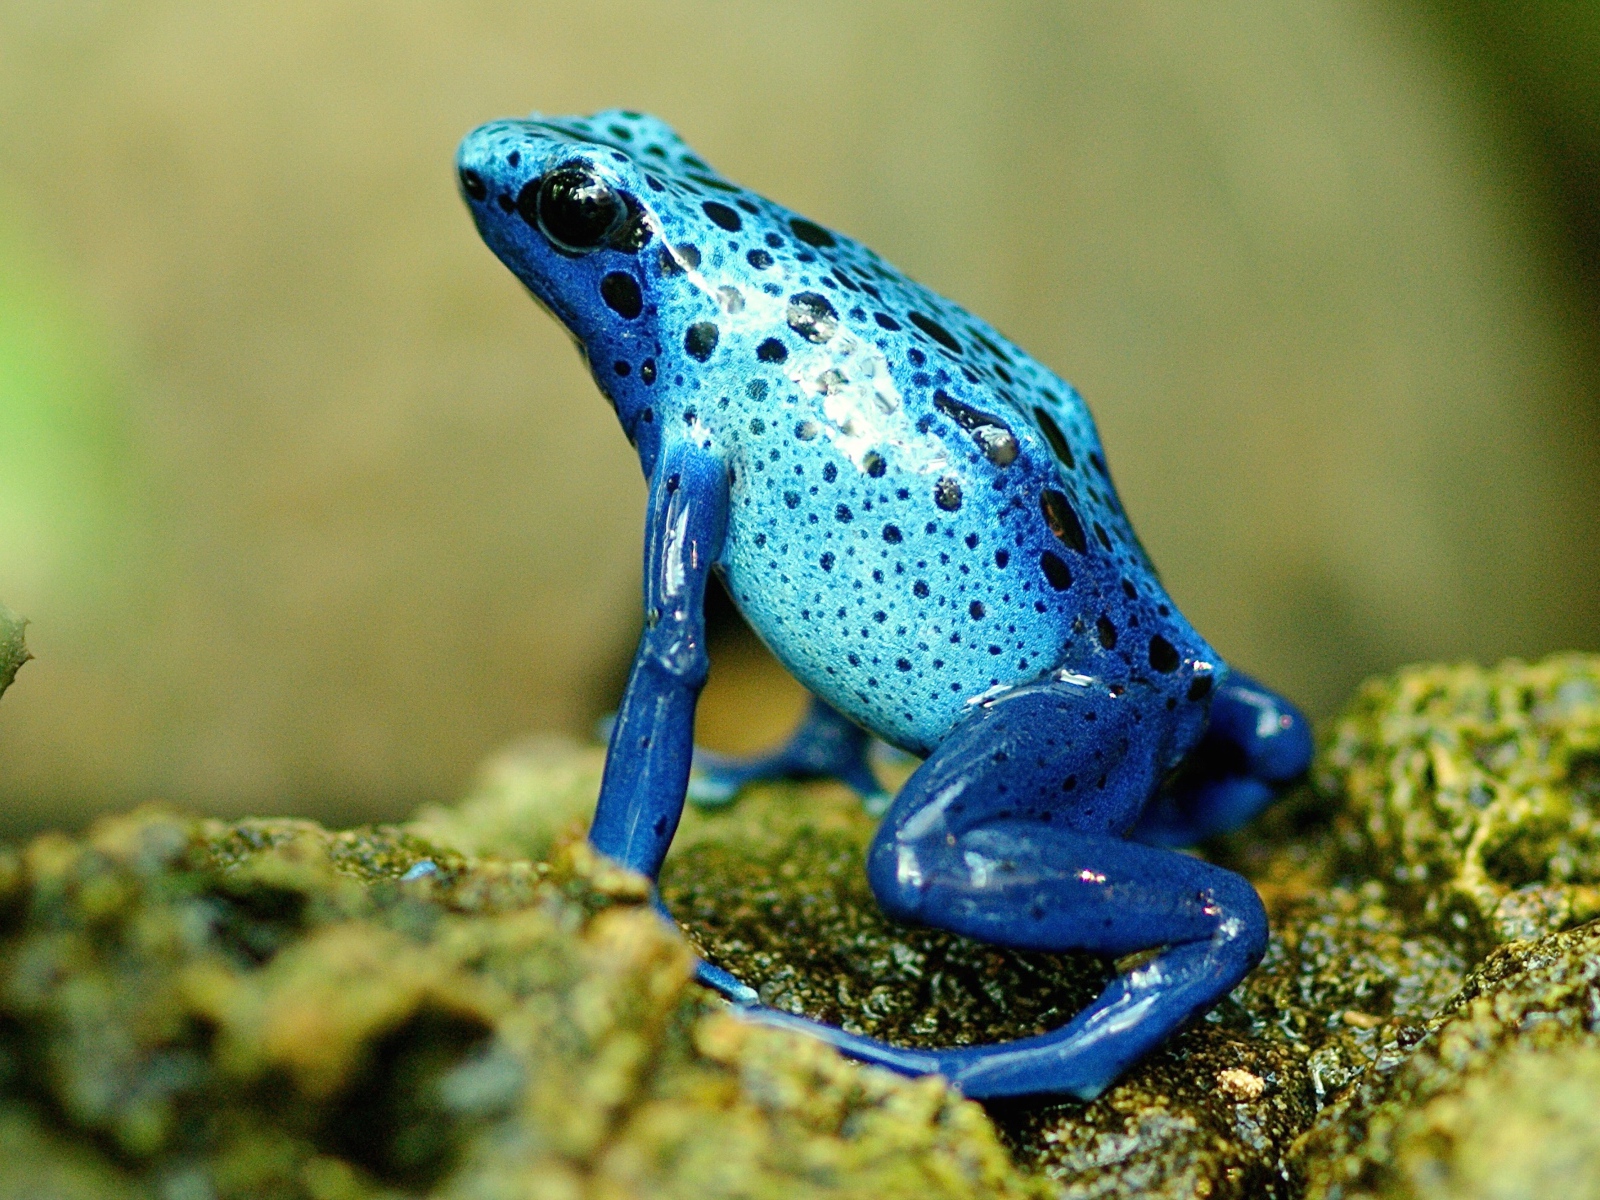 Blue exotic frog on a stone